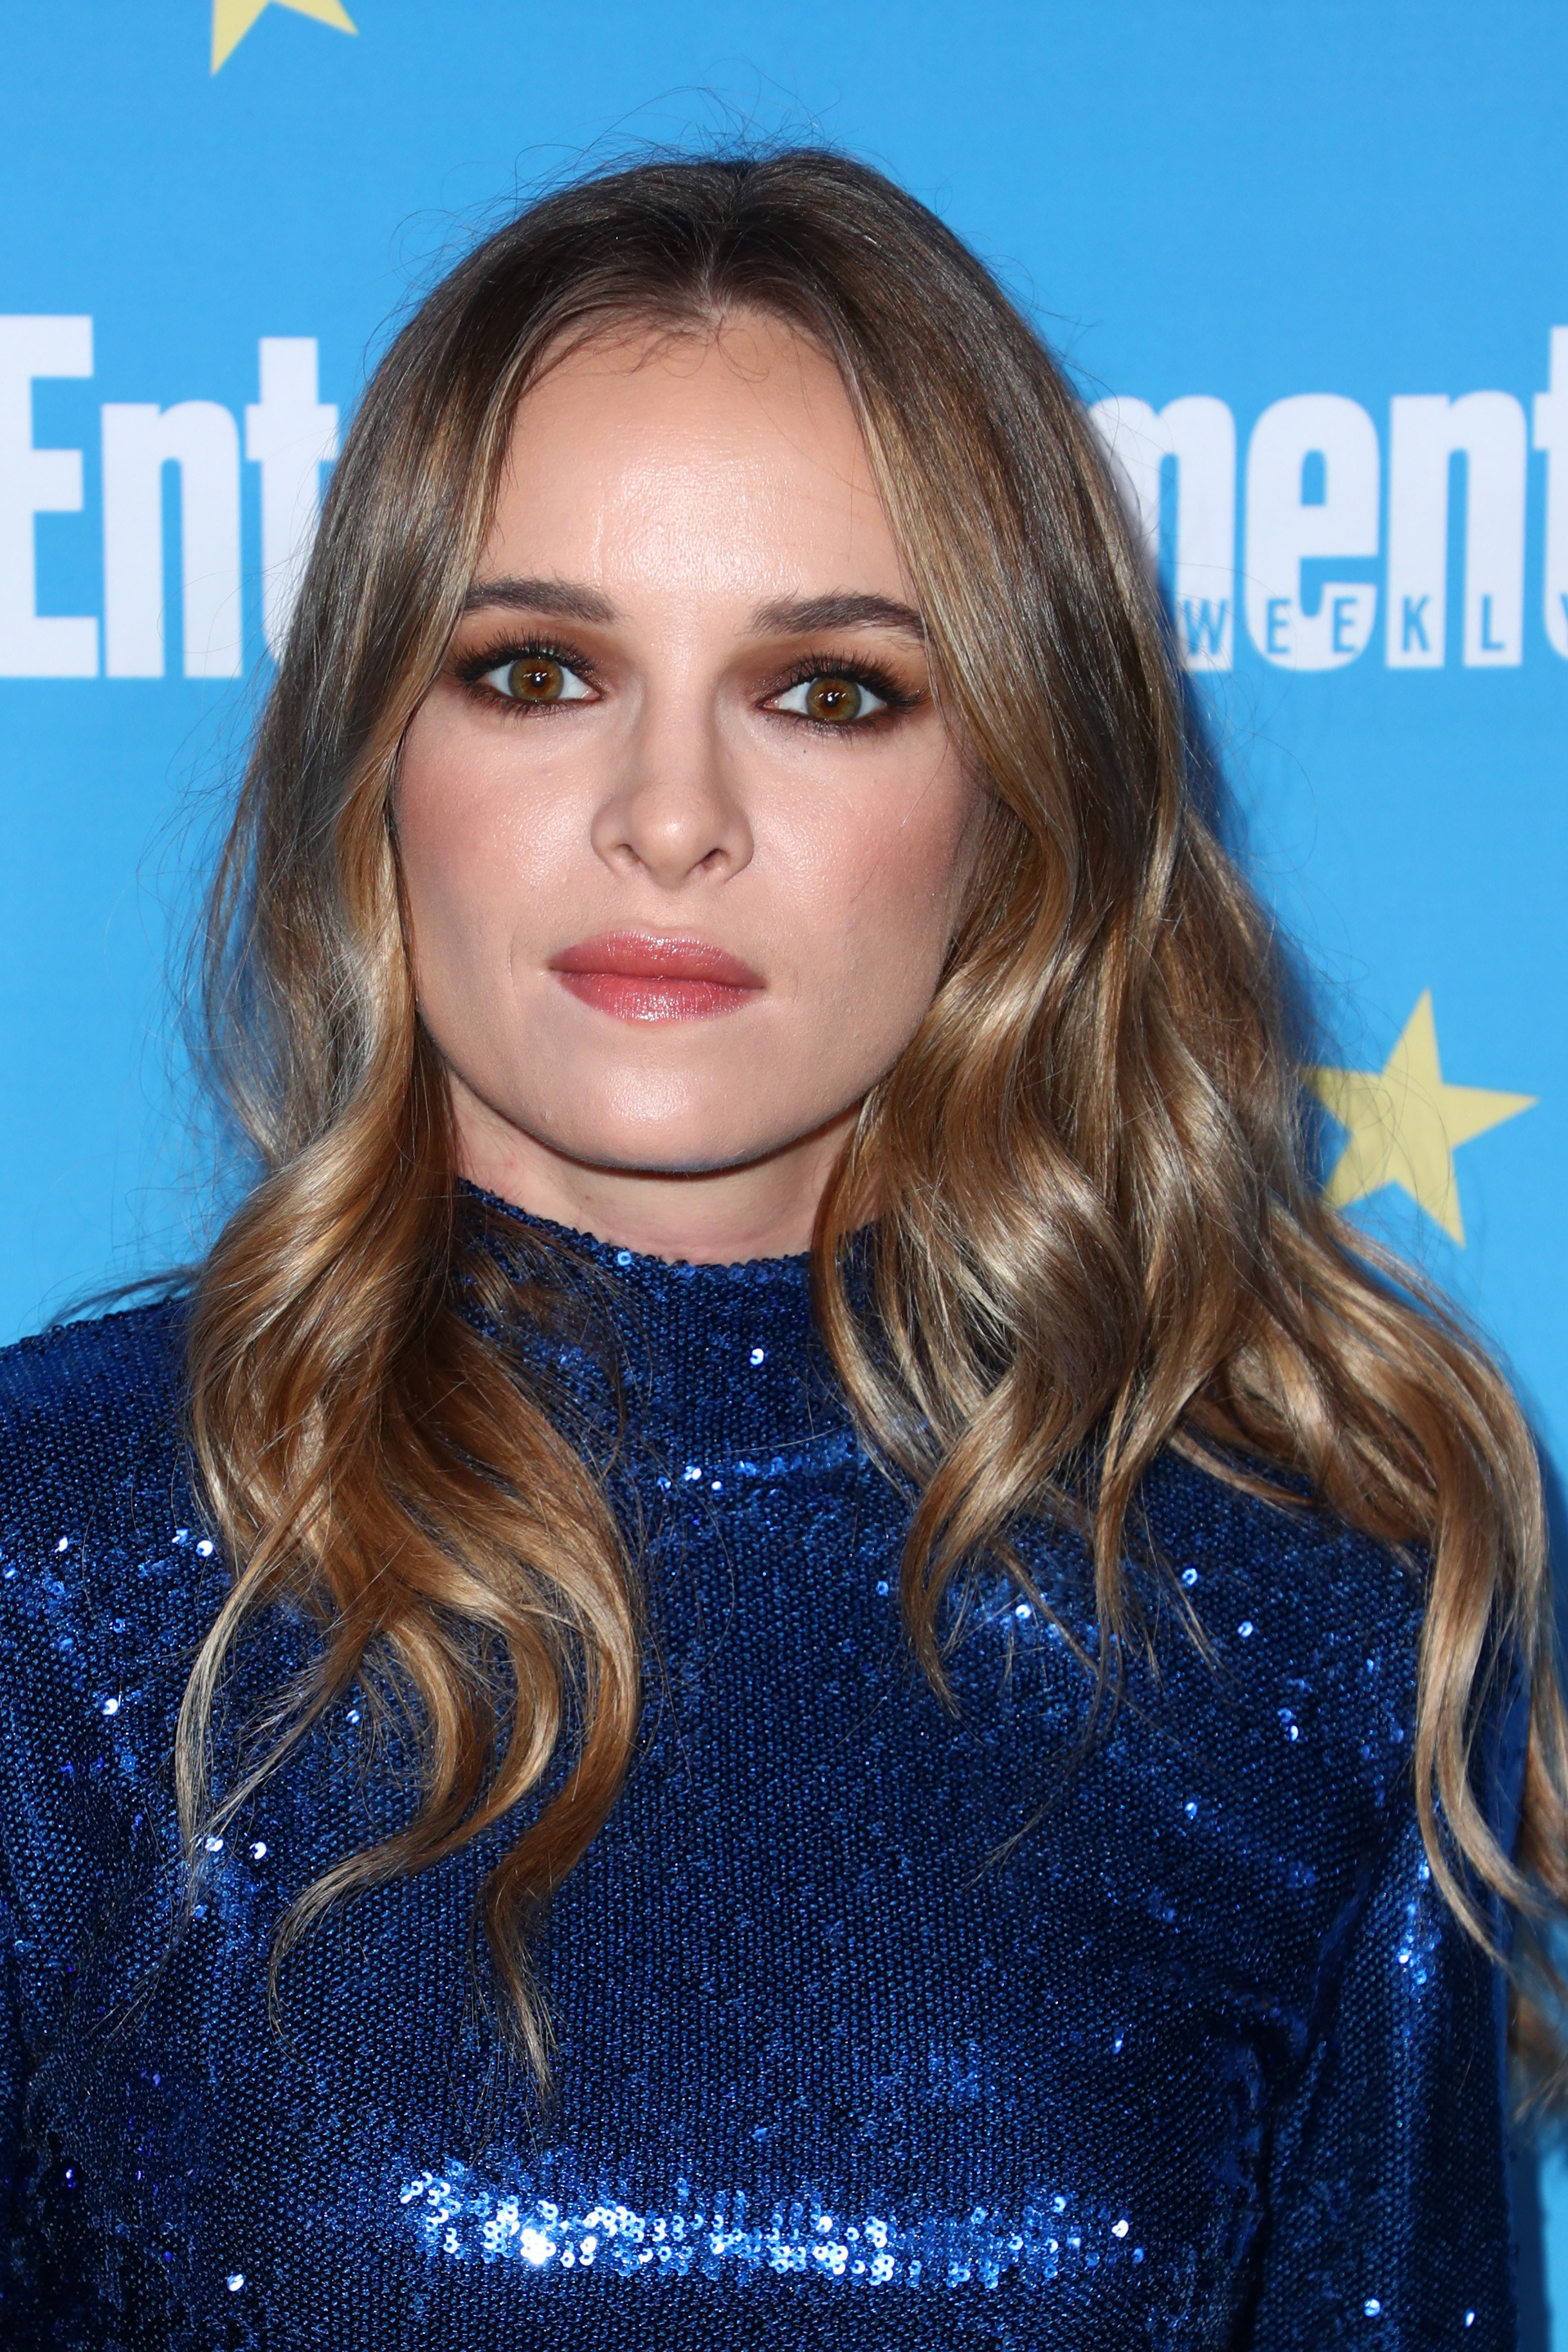 Danielle Panabaker attends the Entertainment Weekly Comic-Con Celebration at Float  on July 20, 2019